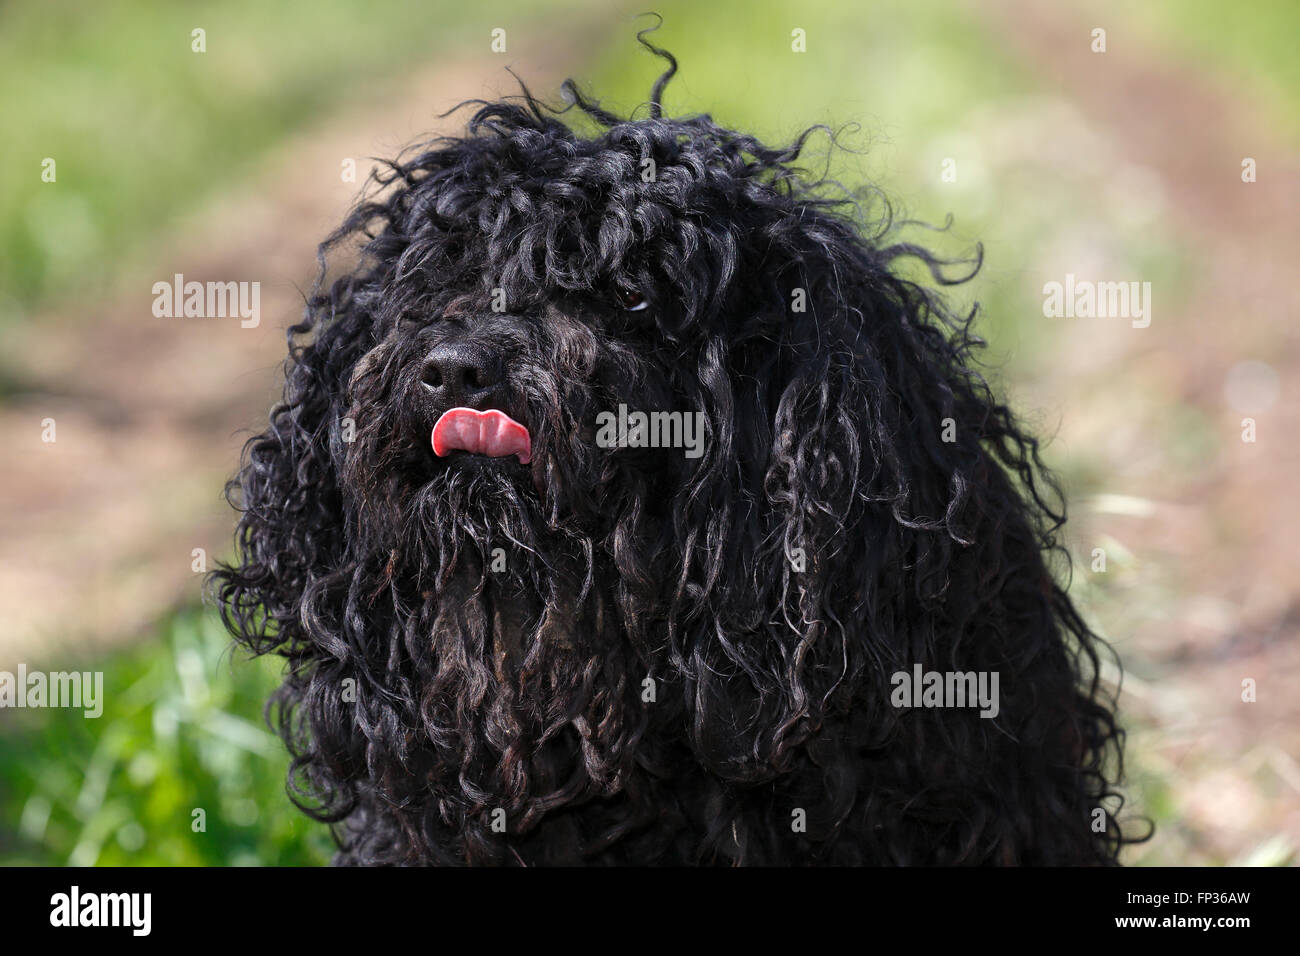 Puli, Hungarian breed of dog, herding dog for sheep (Canis lupus familiaris), portrait, Hungary Stock Photo